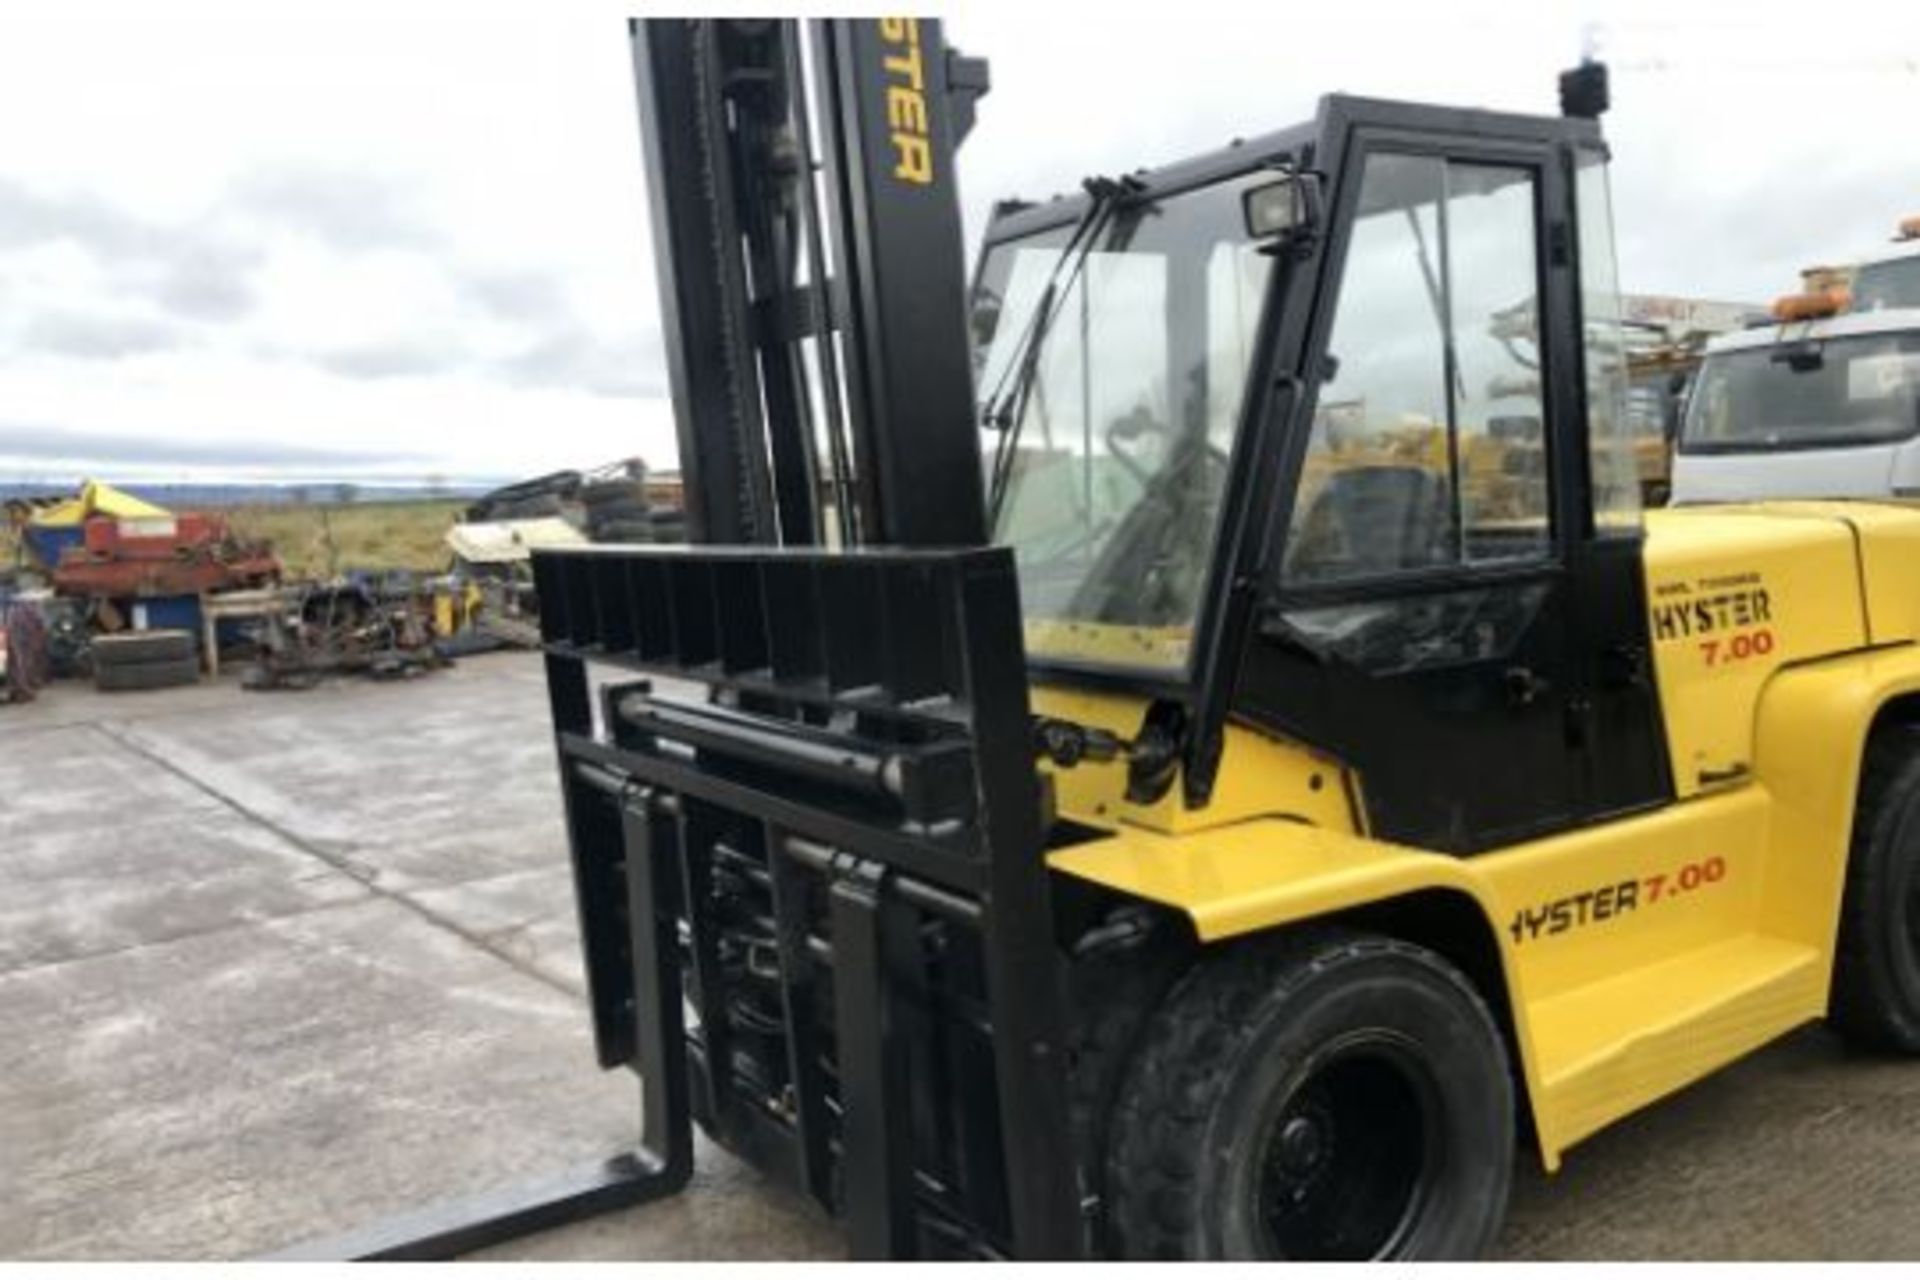 2009 HYSTER H7.00 XL FORKLIFT - Image 2 of 11